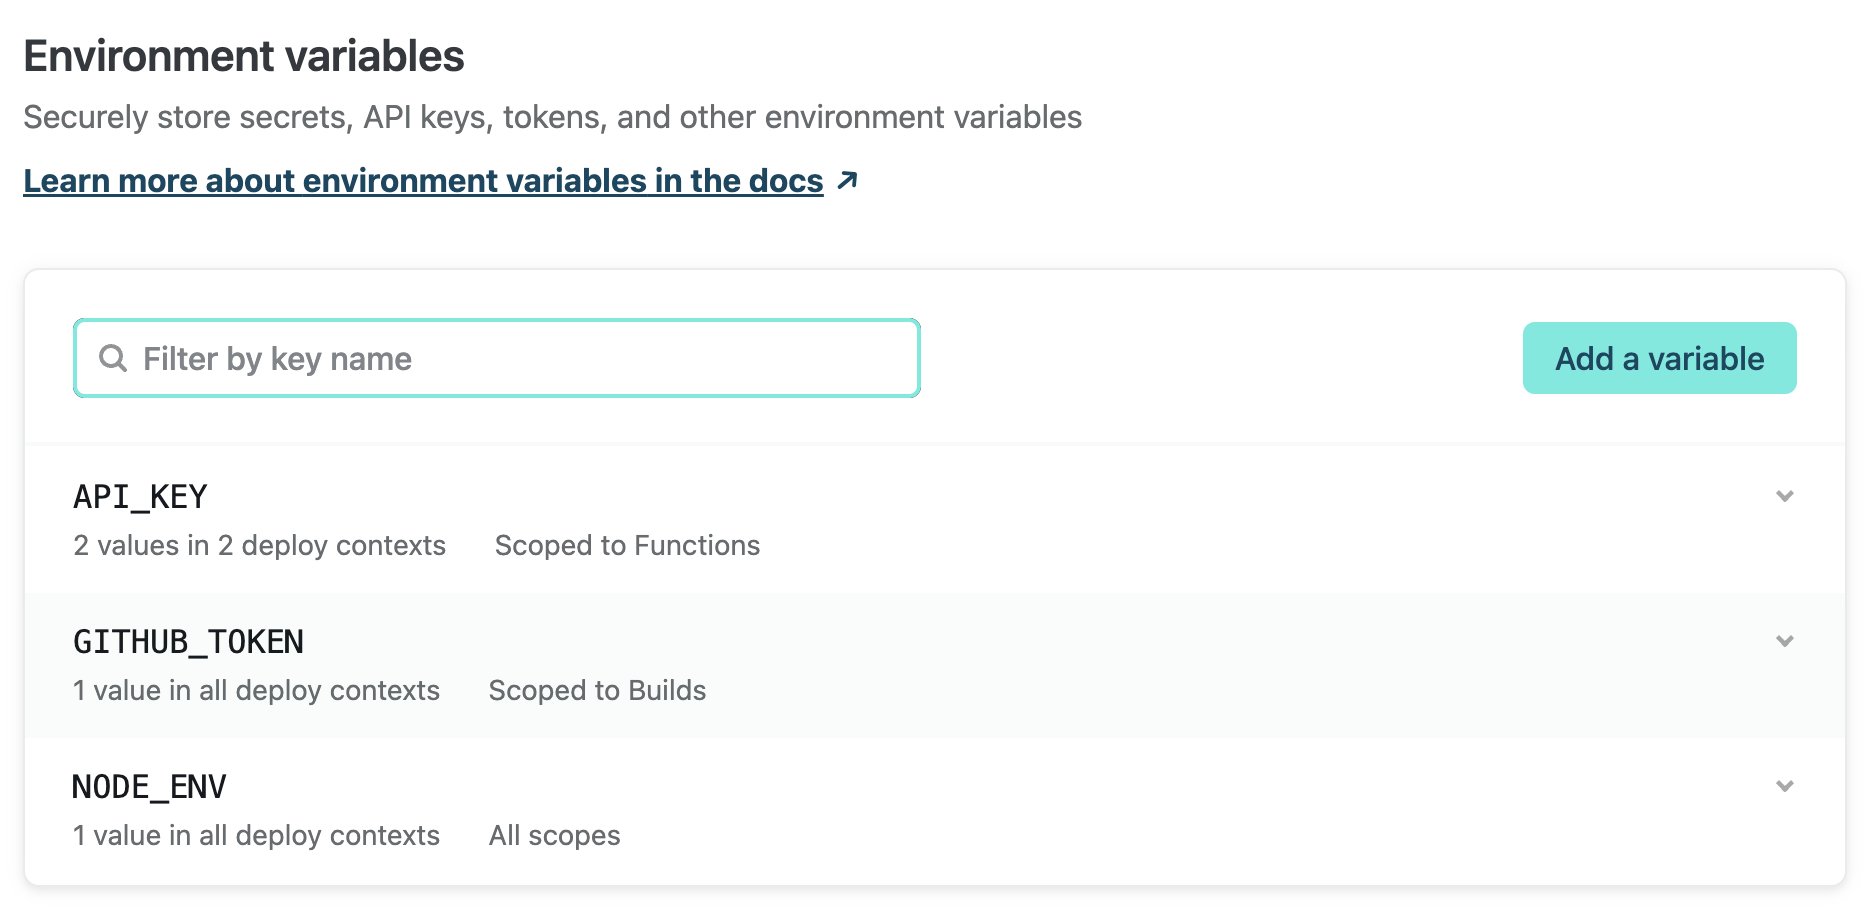 Example list of environment variables with scopes and contextual values in the Netlify UI